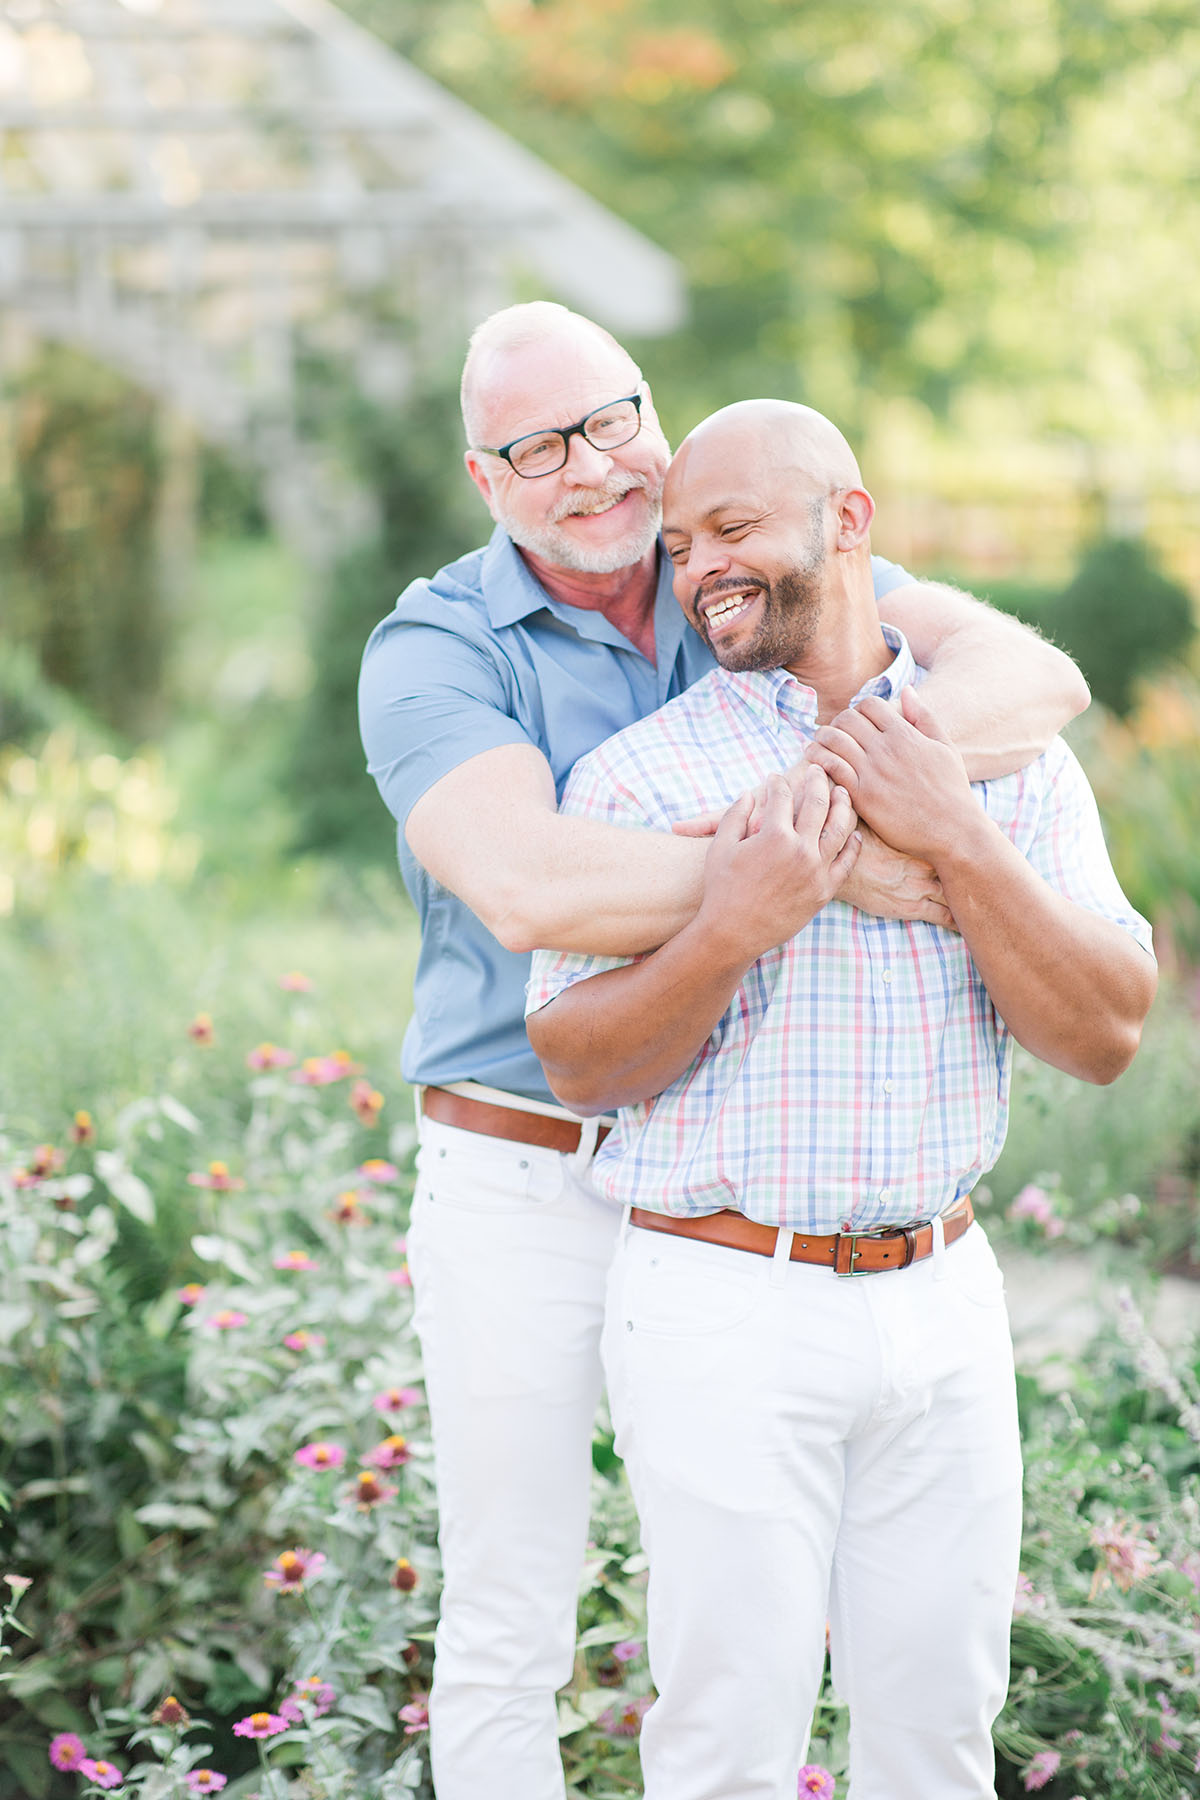 Garden engagement photos at the Franklin Park Conservatory LGBTQ+ weddings two grooms engagement gay outdoors nature